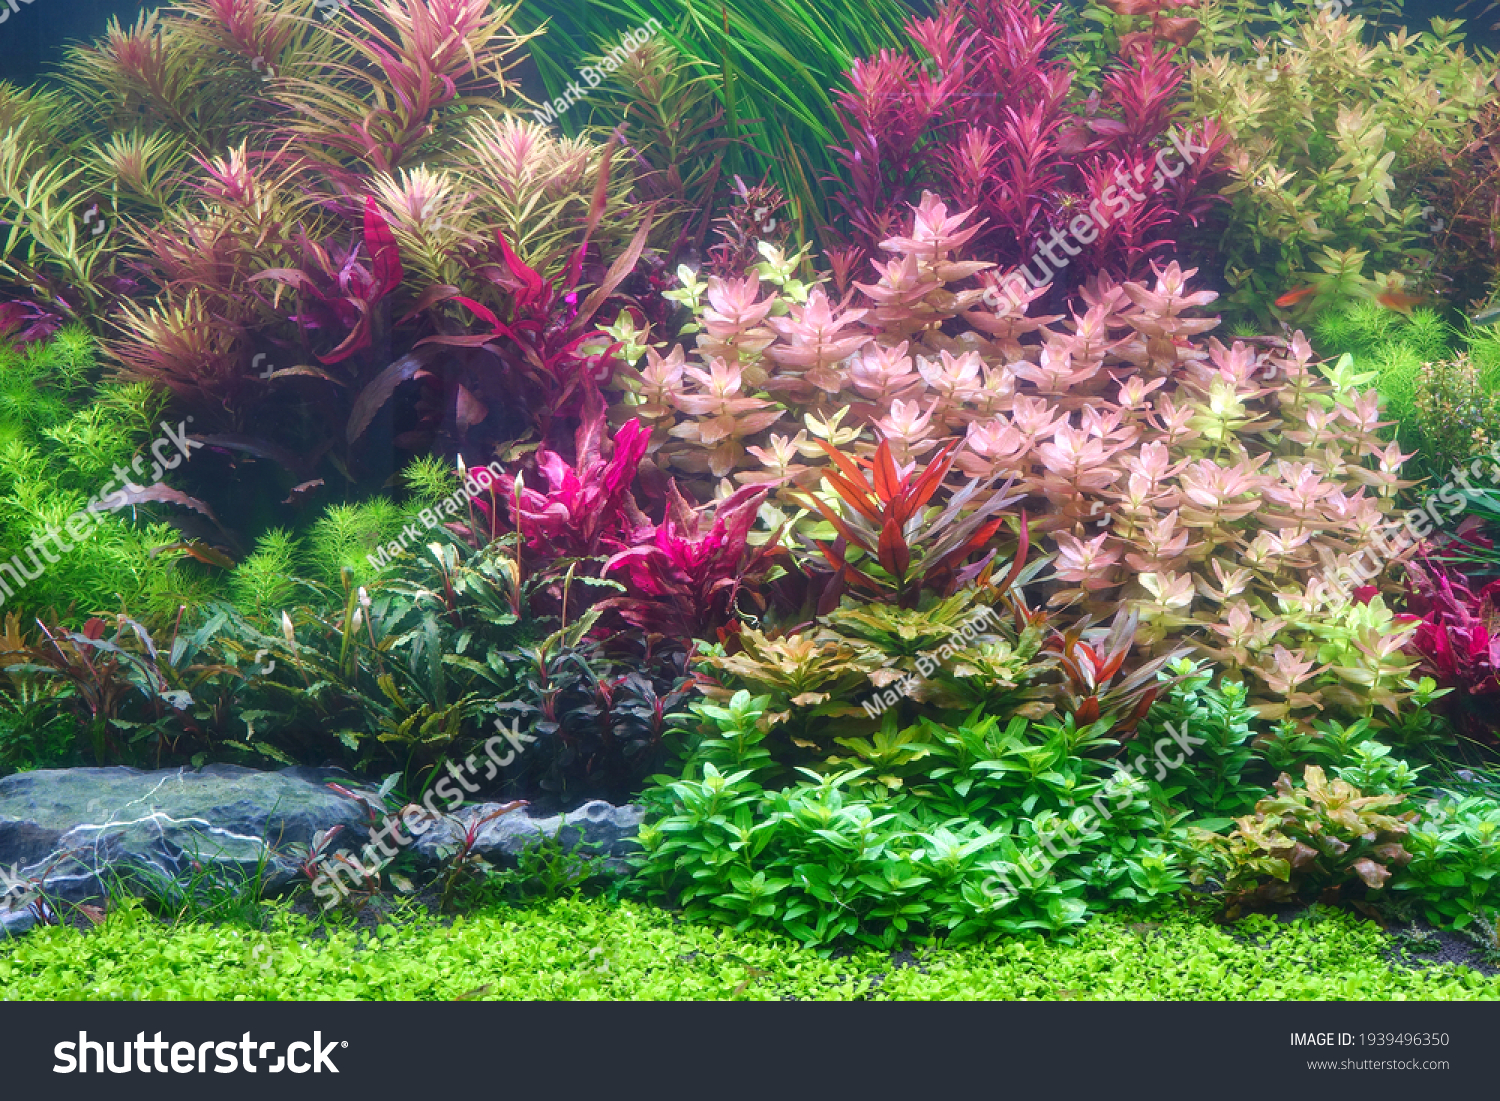 Colorful aquatic plants in aquarium tank with Nature Dutch style aquascaping layout #1939496350